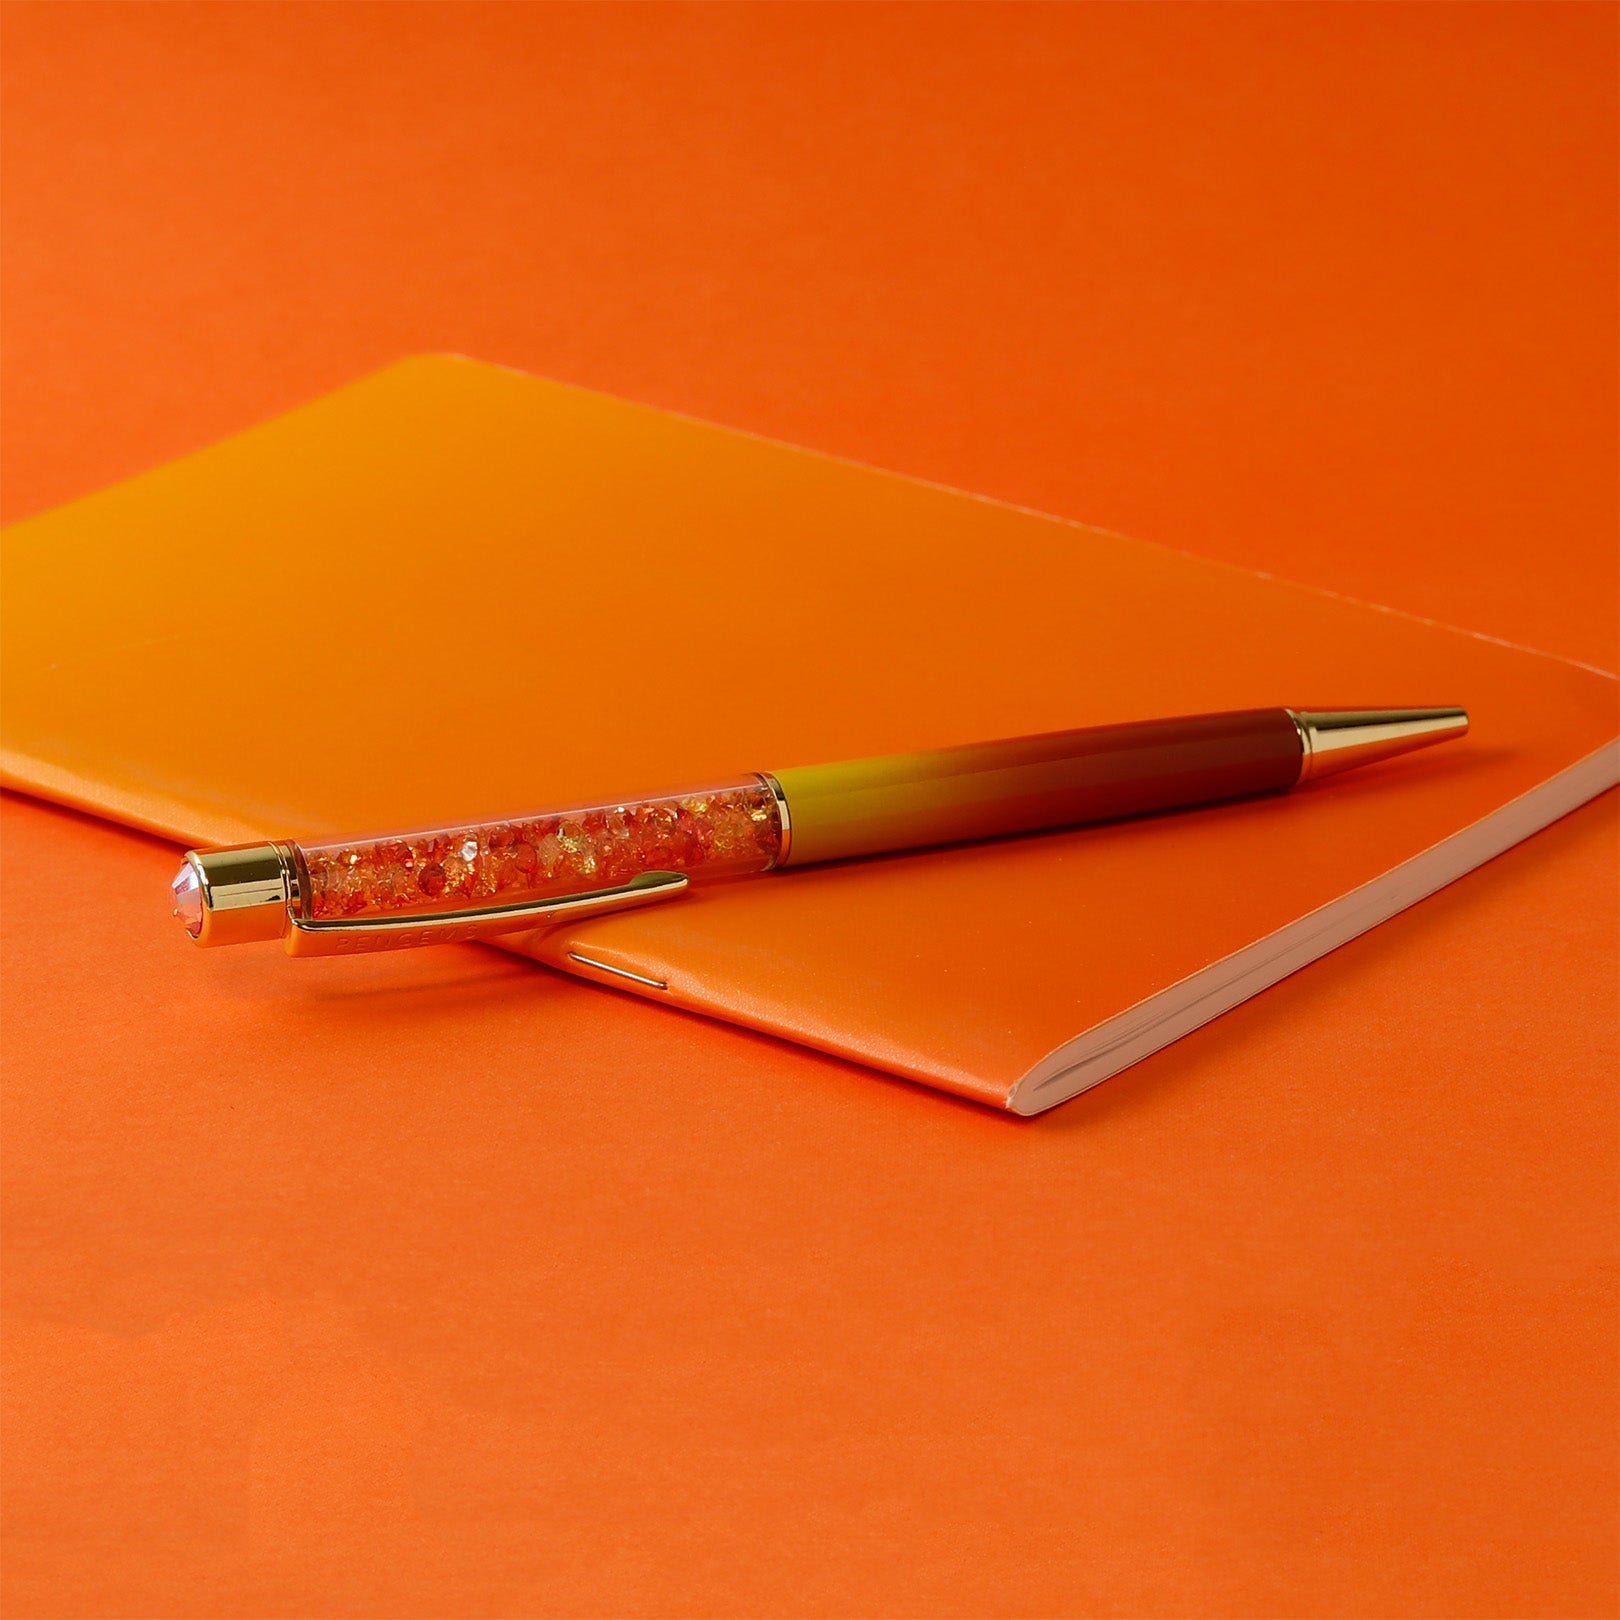 Flame Notebook